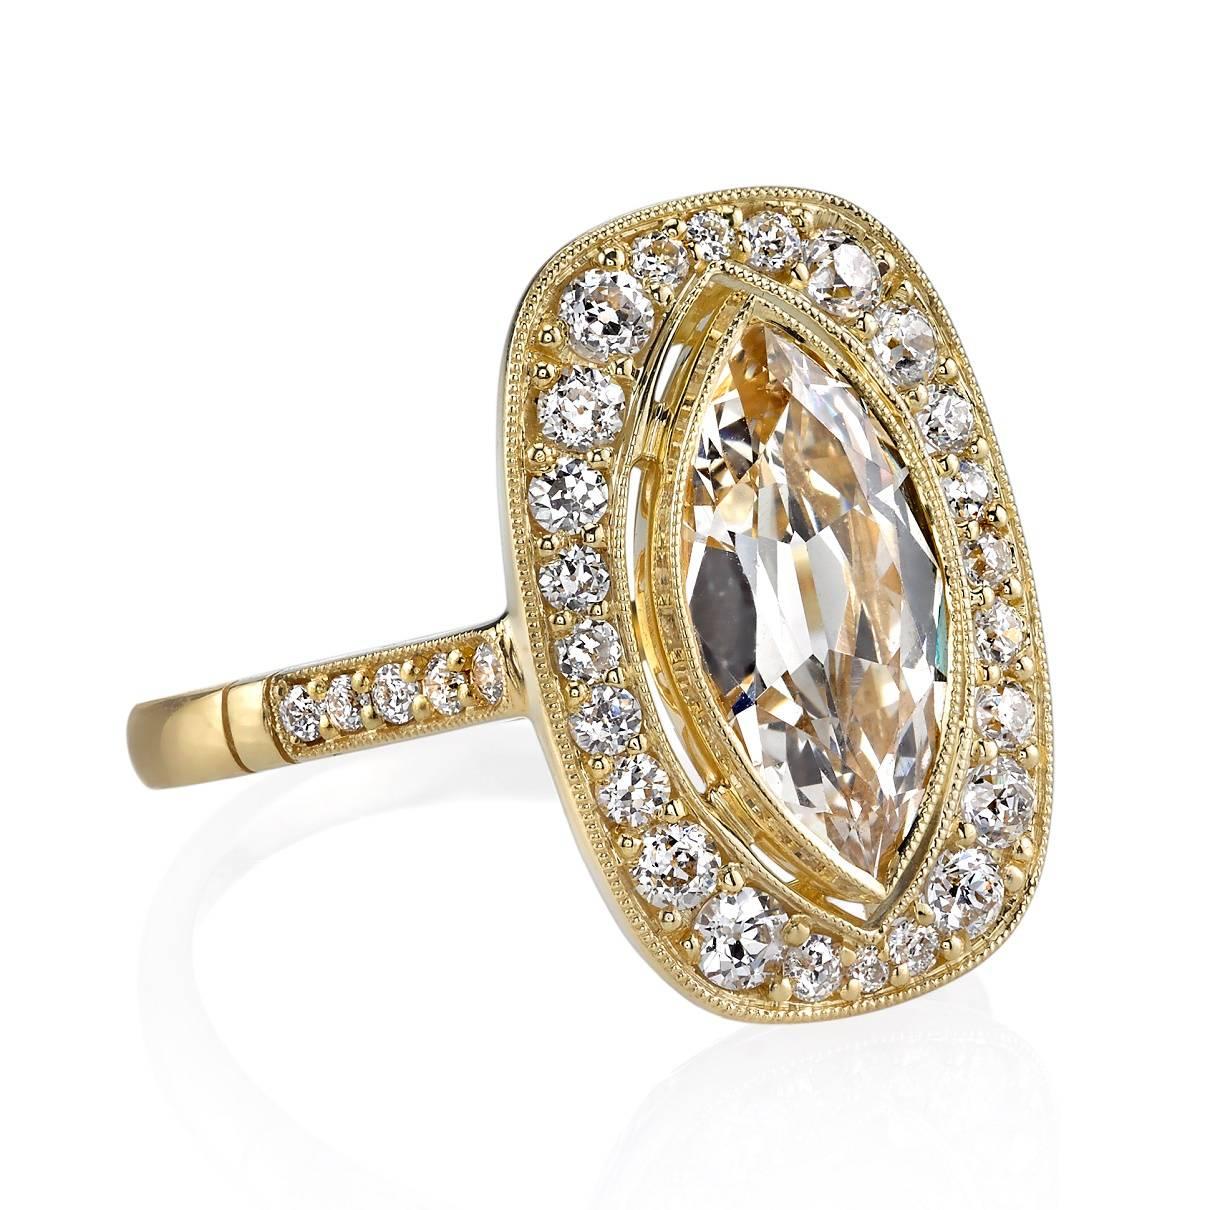 1.59ct N/VS2 GIA certified Marquise cut diamond set in a handcrafted 18k yellow gold mounting. A unique halo design featuring a bezel set diamond, low profile, and intricate gallery.